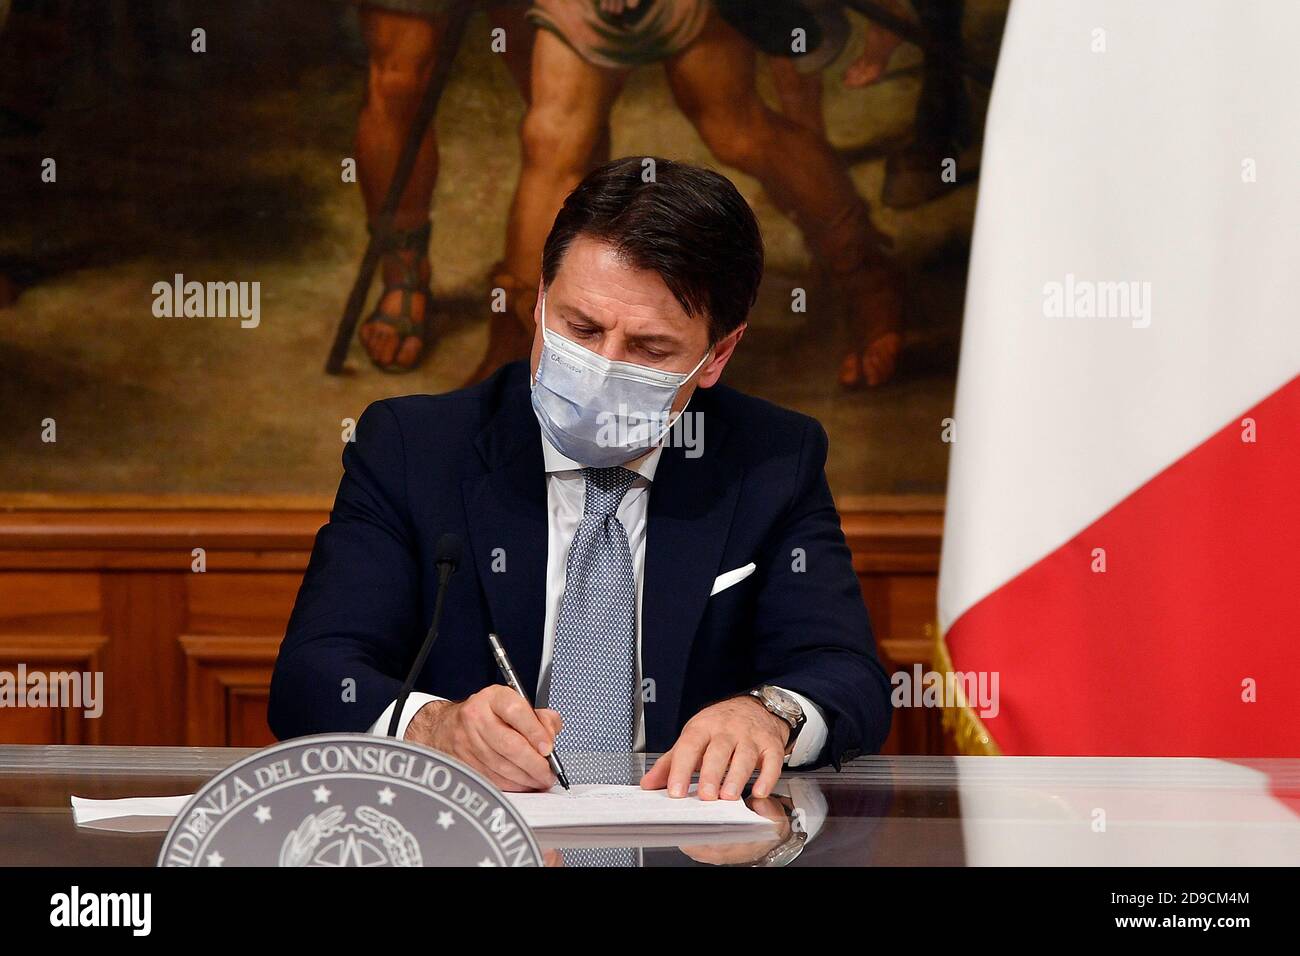 Rome, Italy. 04th Nov, 2020. The Italian Prime Minister Giuseppe Conte wearing a face mask during the press conference about the Government decree containing new measures to contrast Covid-19 emergency. Italy will follow 3 kinds of different lockdown, depending on the diffusion of the pandemic in the different Regions. There will be red, orange and yellow zones. Rome (Italy), November 4th 2020 Photo Pool Alessandro Serrano' Insidefoto Credit: insidefoto srl/Alamy Live News Stock Photo